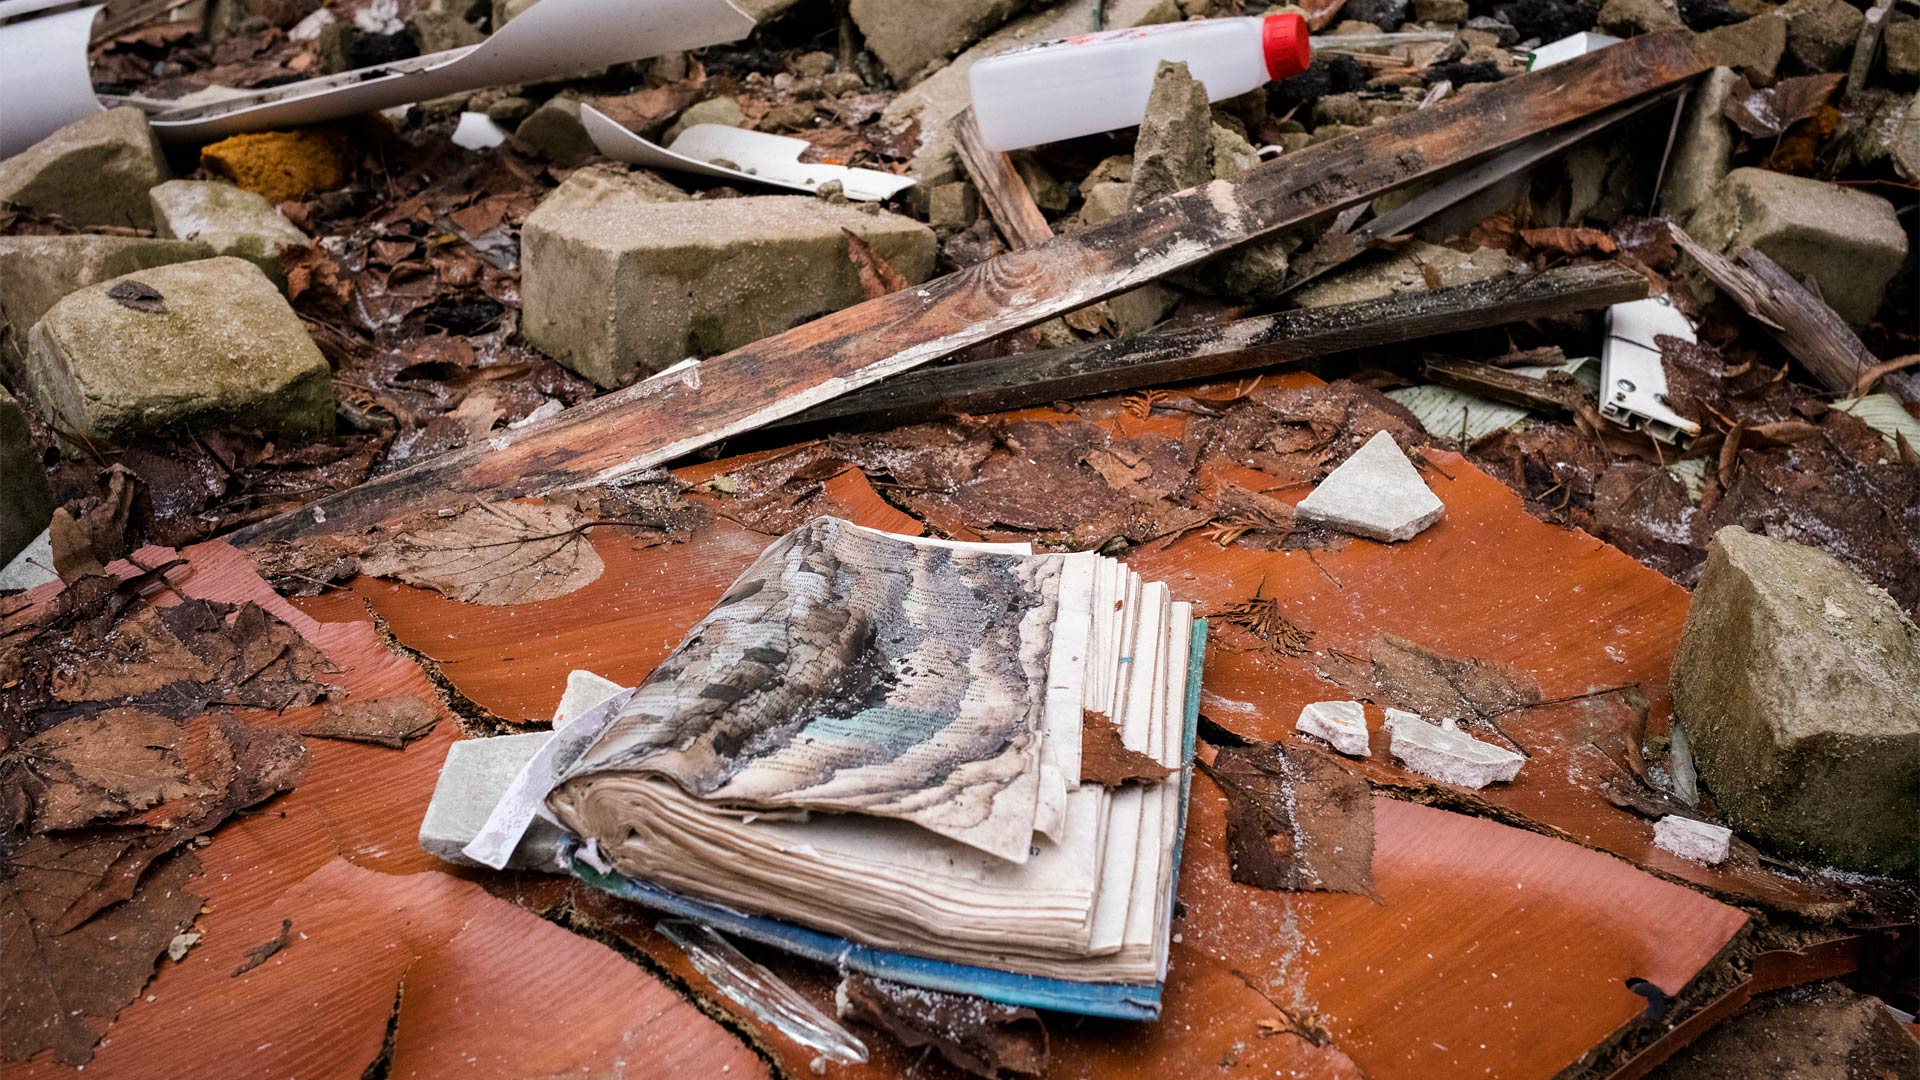 Rubble strewn on the ground. In the foreground is an open book with charred pages.